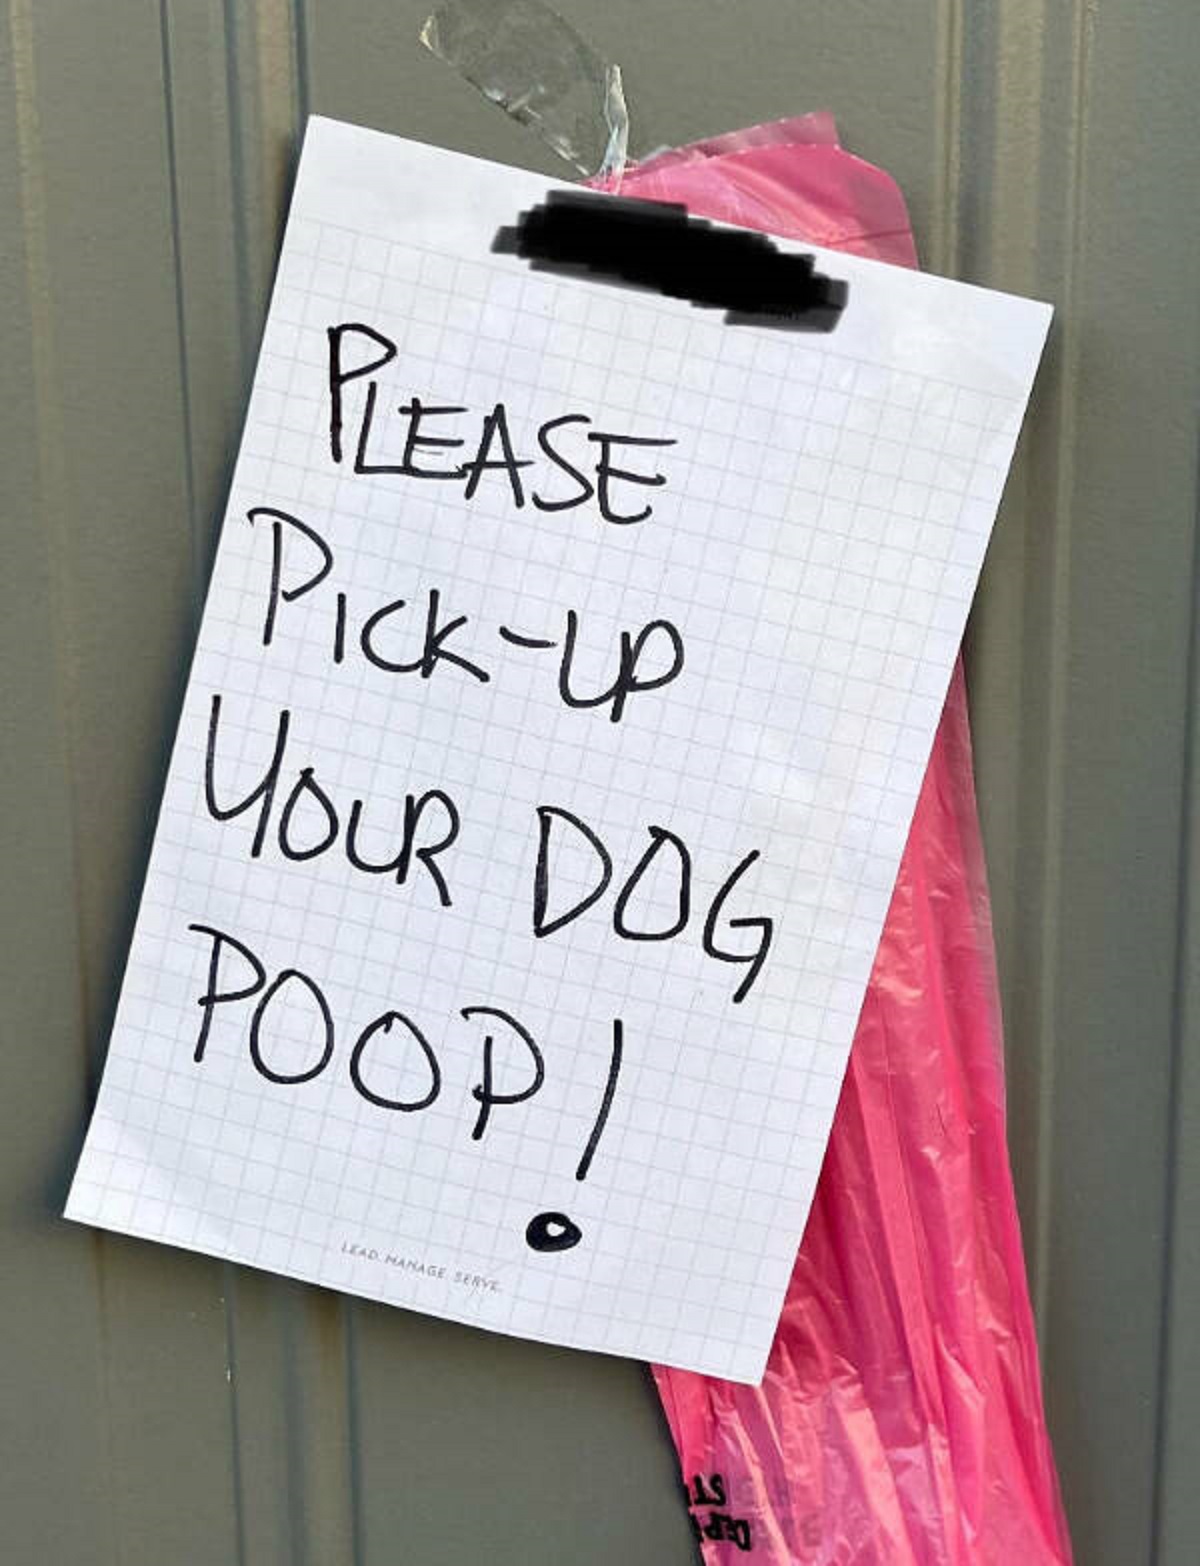 “Found this posted to our door (in a townhome association) today and we don’t even have a dog.”